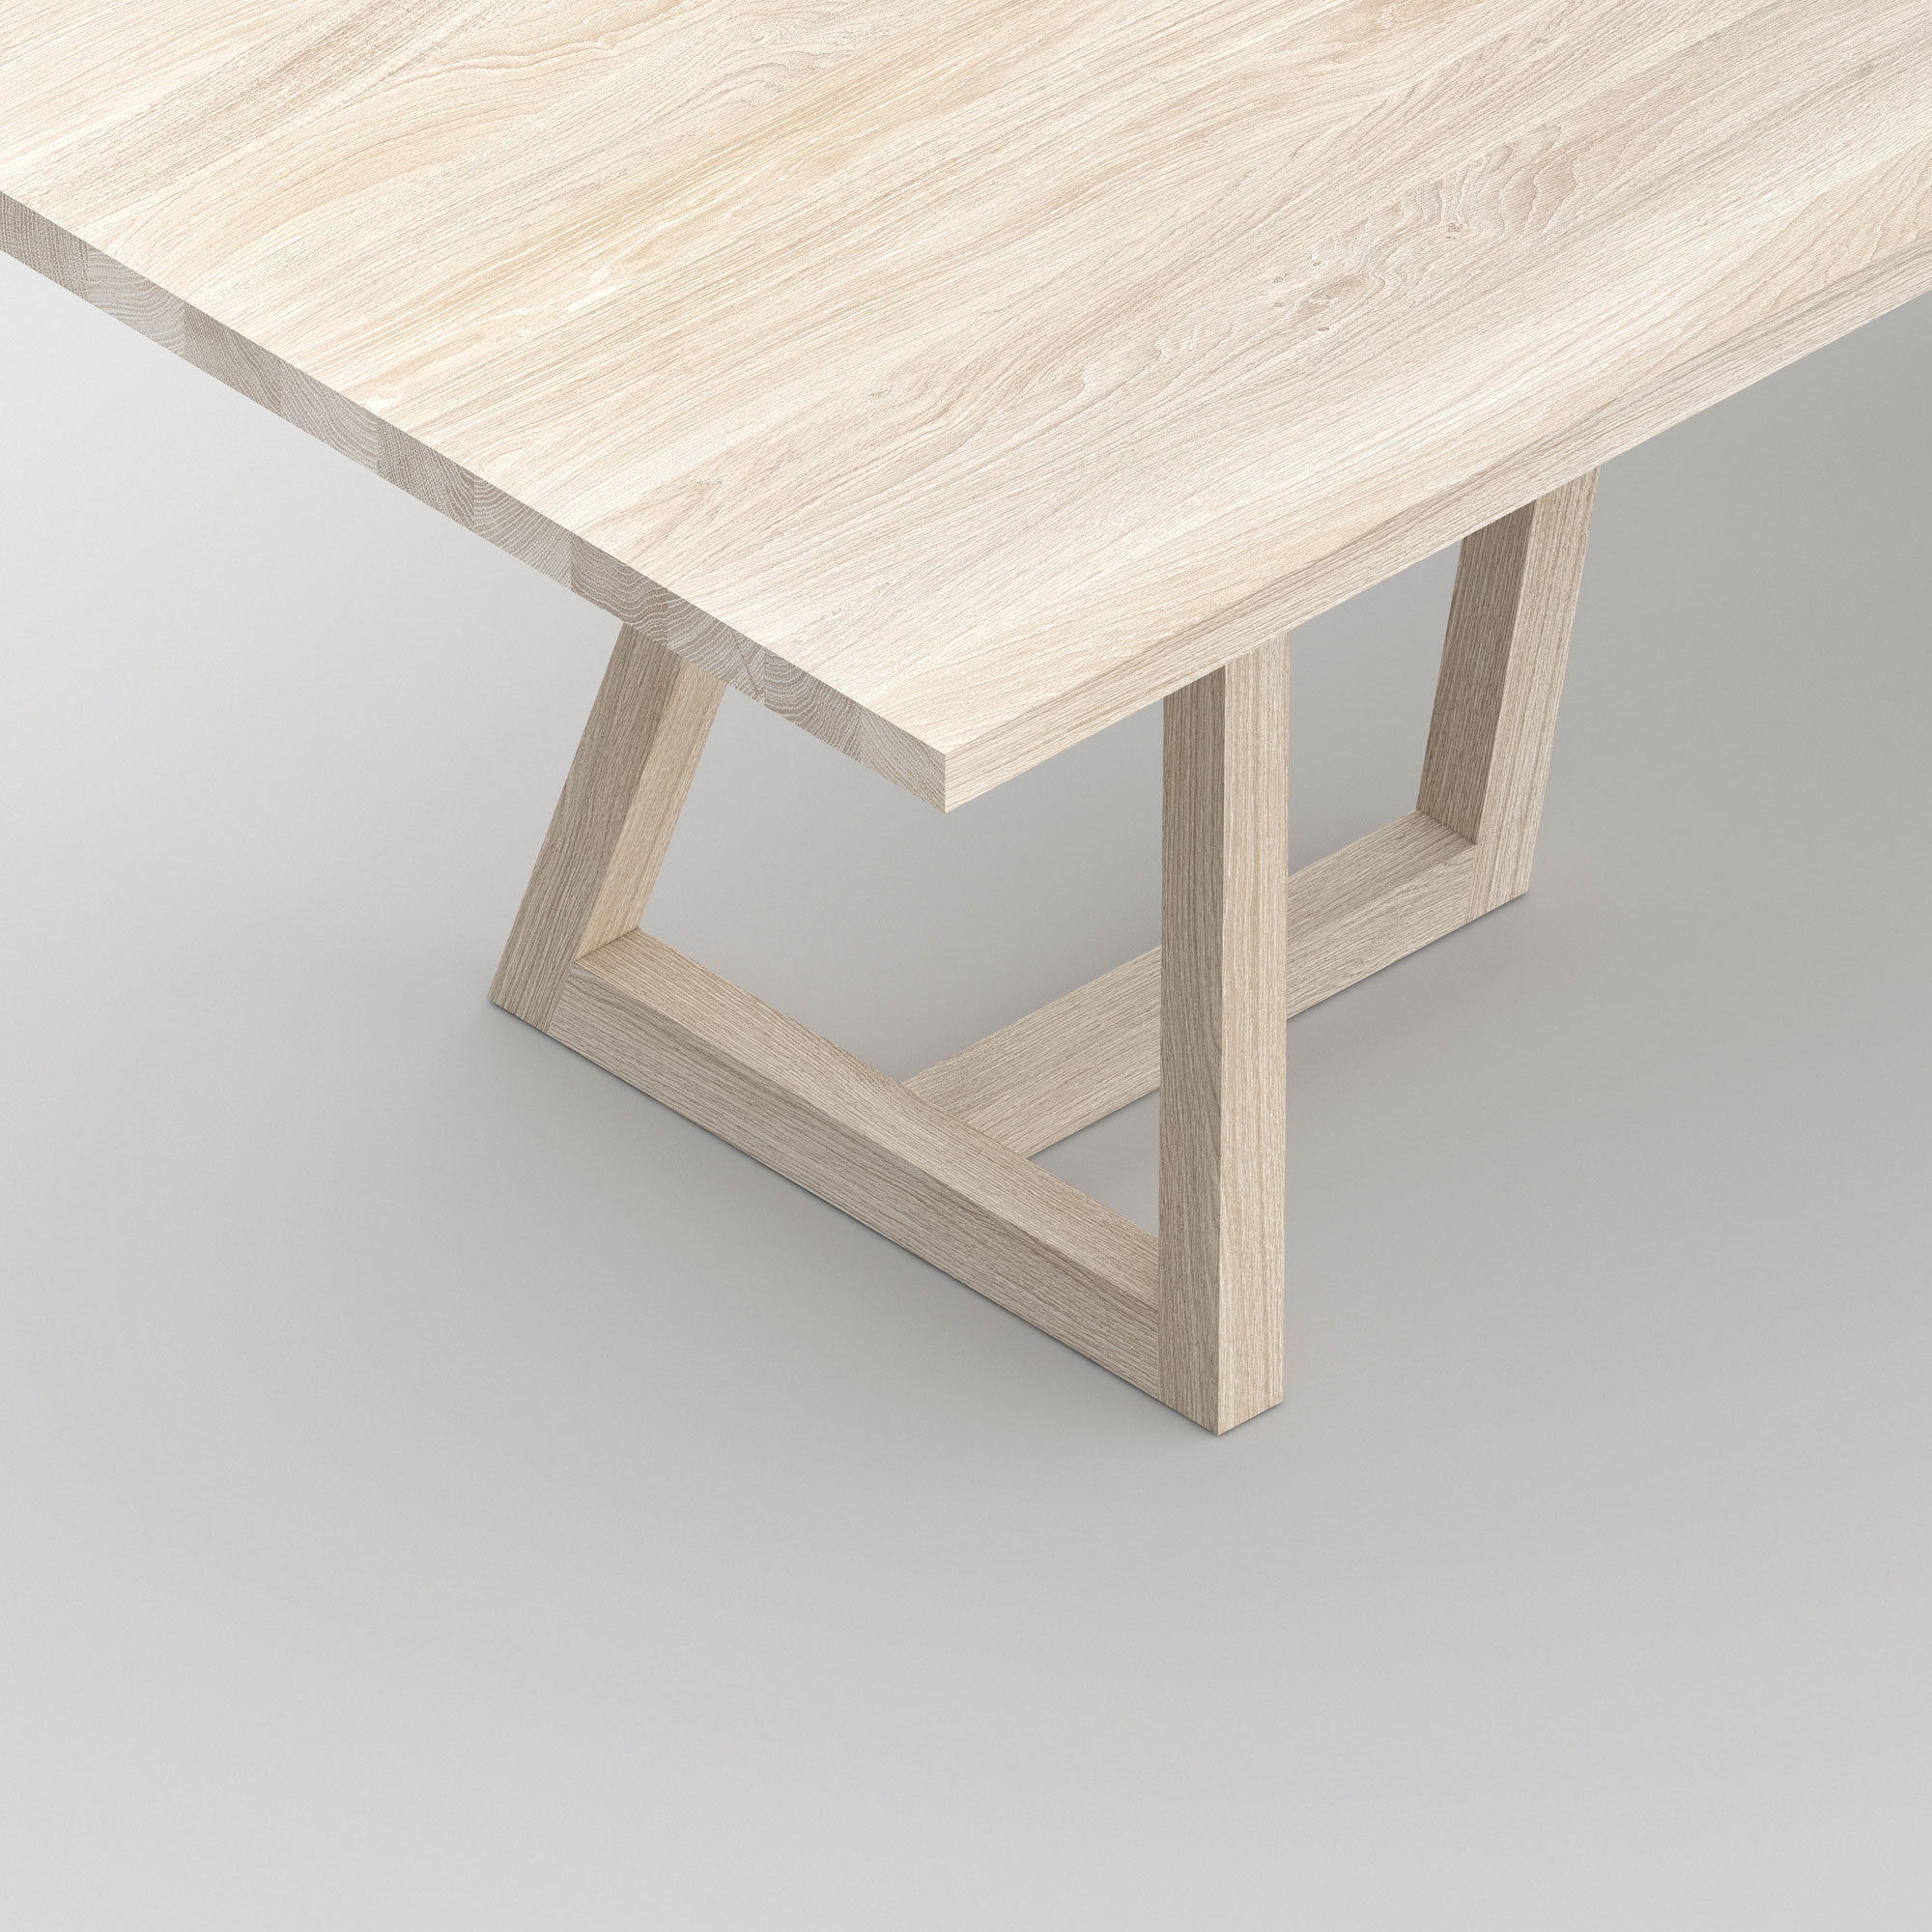 Designer Solid Wood Table MARGO cam3 custom made in solid wood by vitamin design